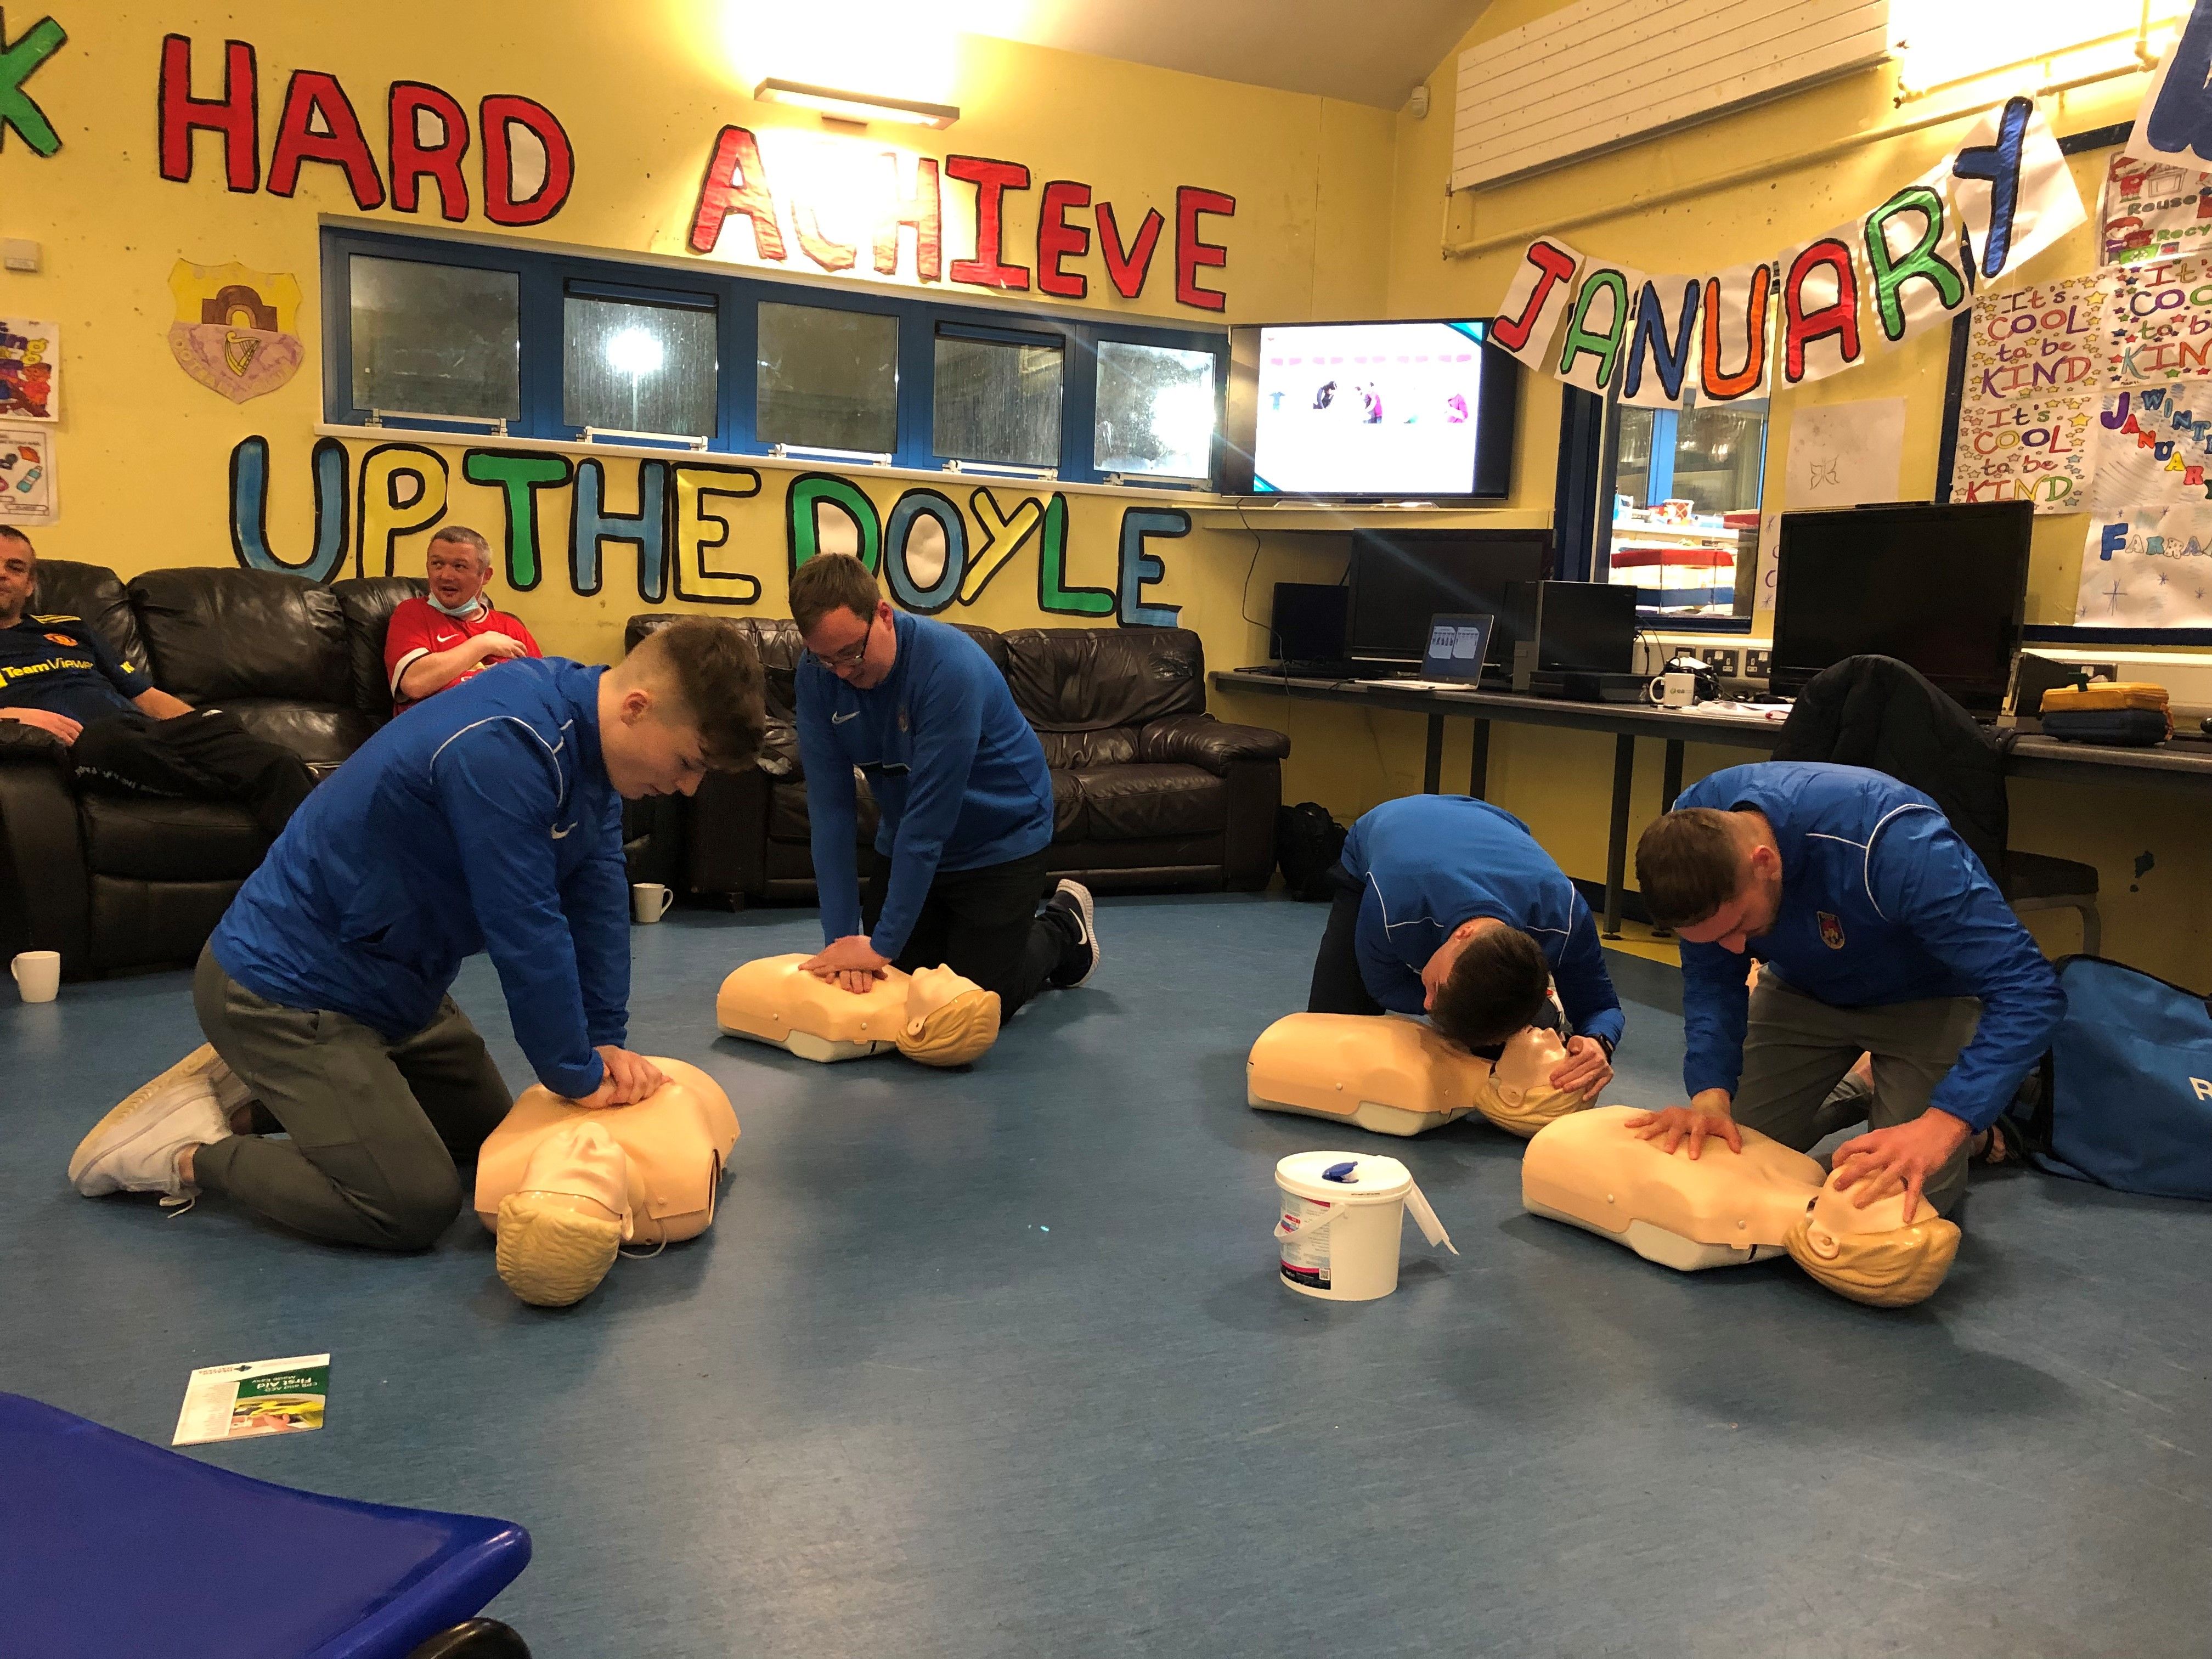 LIFE-SAVING: Doyle Youth Club members being trained on Wednesday evening